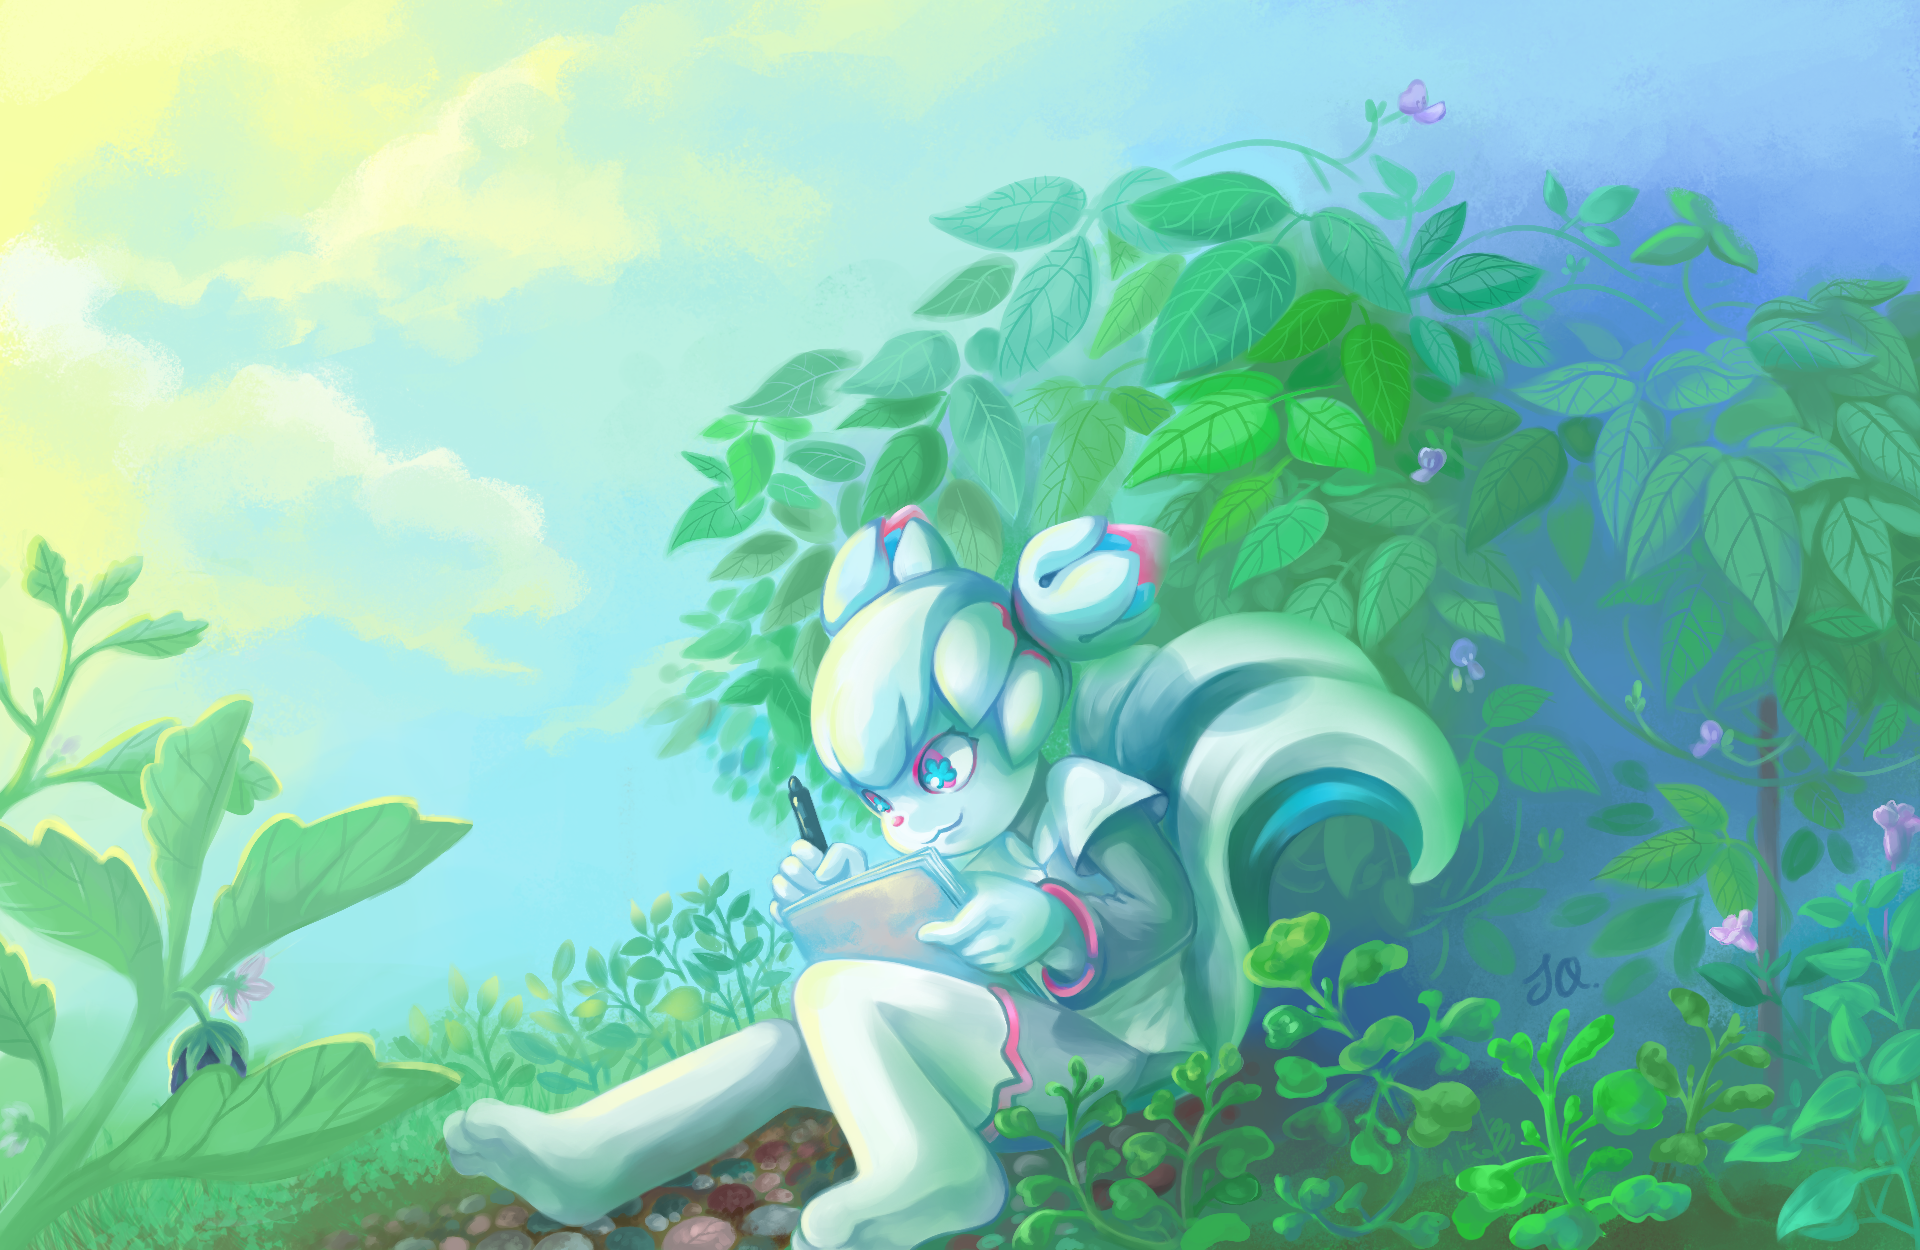 A digital painting of Kiki, the white cybersquirrel Krita mascot, sitting and sketching in a lush green garden, against a backdrop of wingbeans growing on a trellis, and amidst a patch of Brazillian spinach, Asystasia and brinjal